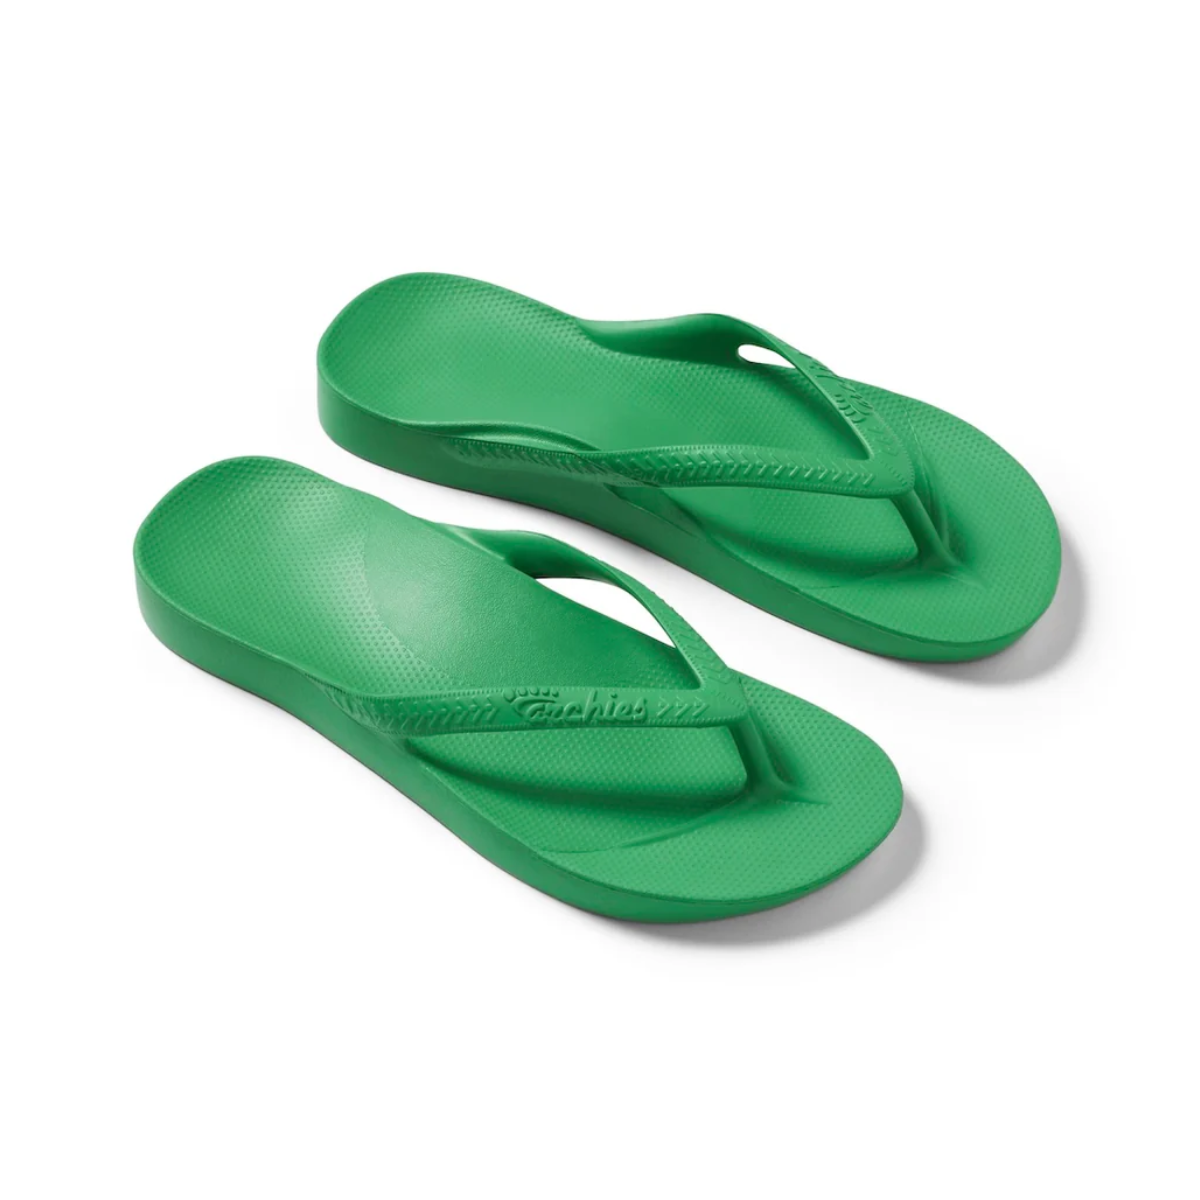 A pair of Archies Flip Flops in Green with a textured footbed and thong straps, made from comfortable closed cell foam by ARCHIES FOOTWEAR LLC.